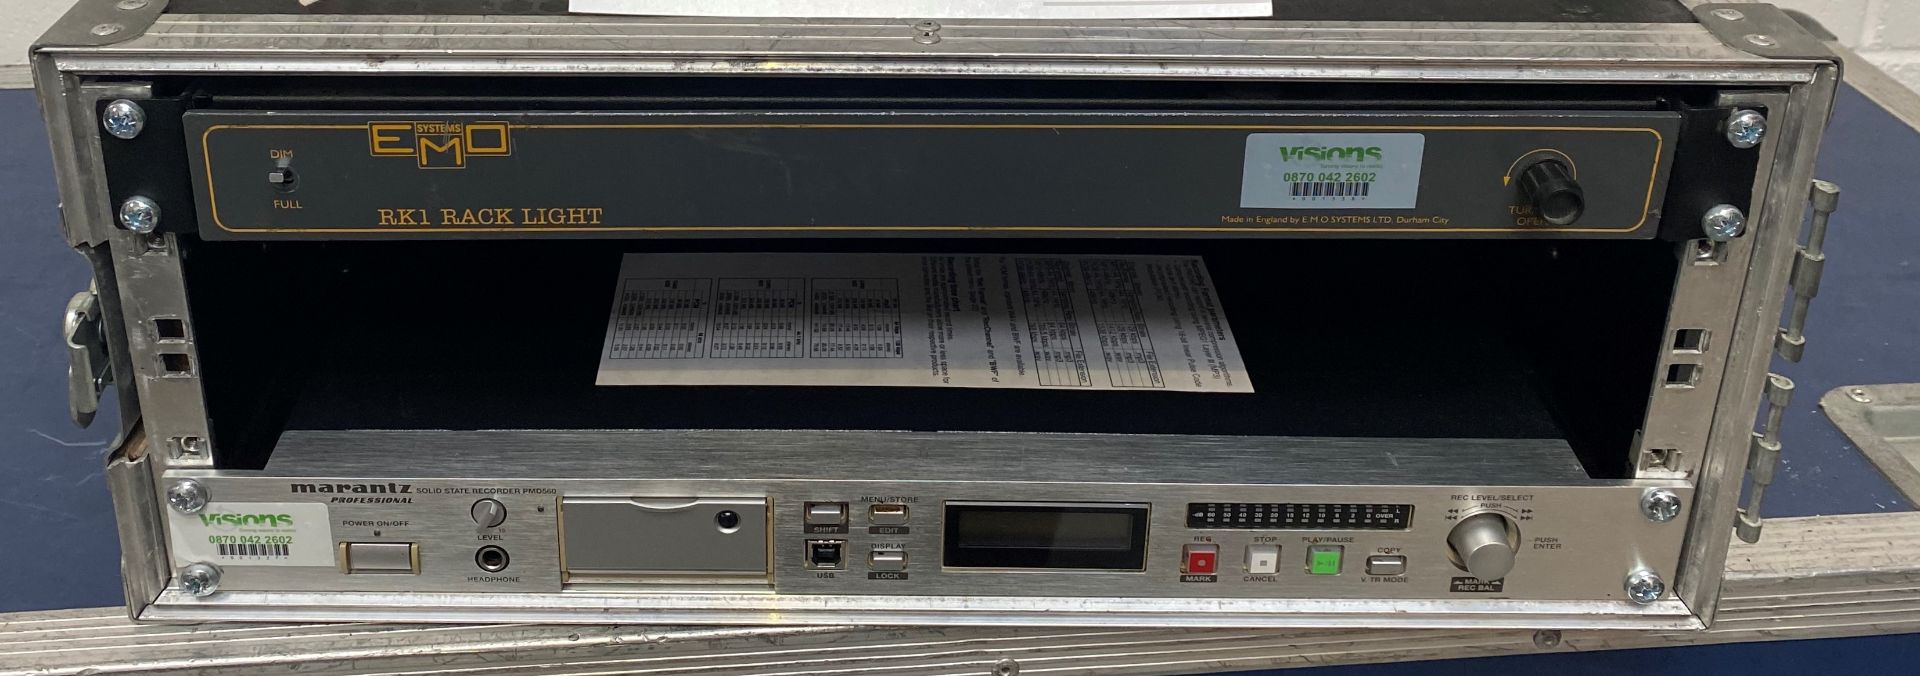 A Marantz PMD560 Solid State Recorder with EMO Systems RK1 Rack Light and flight case (condition - Image 2 of 2